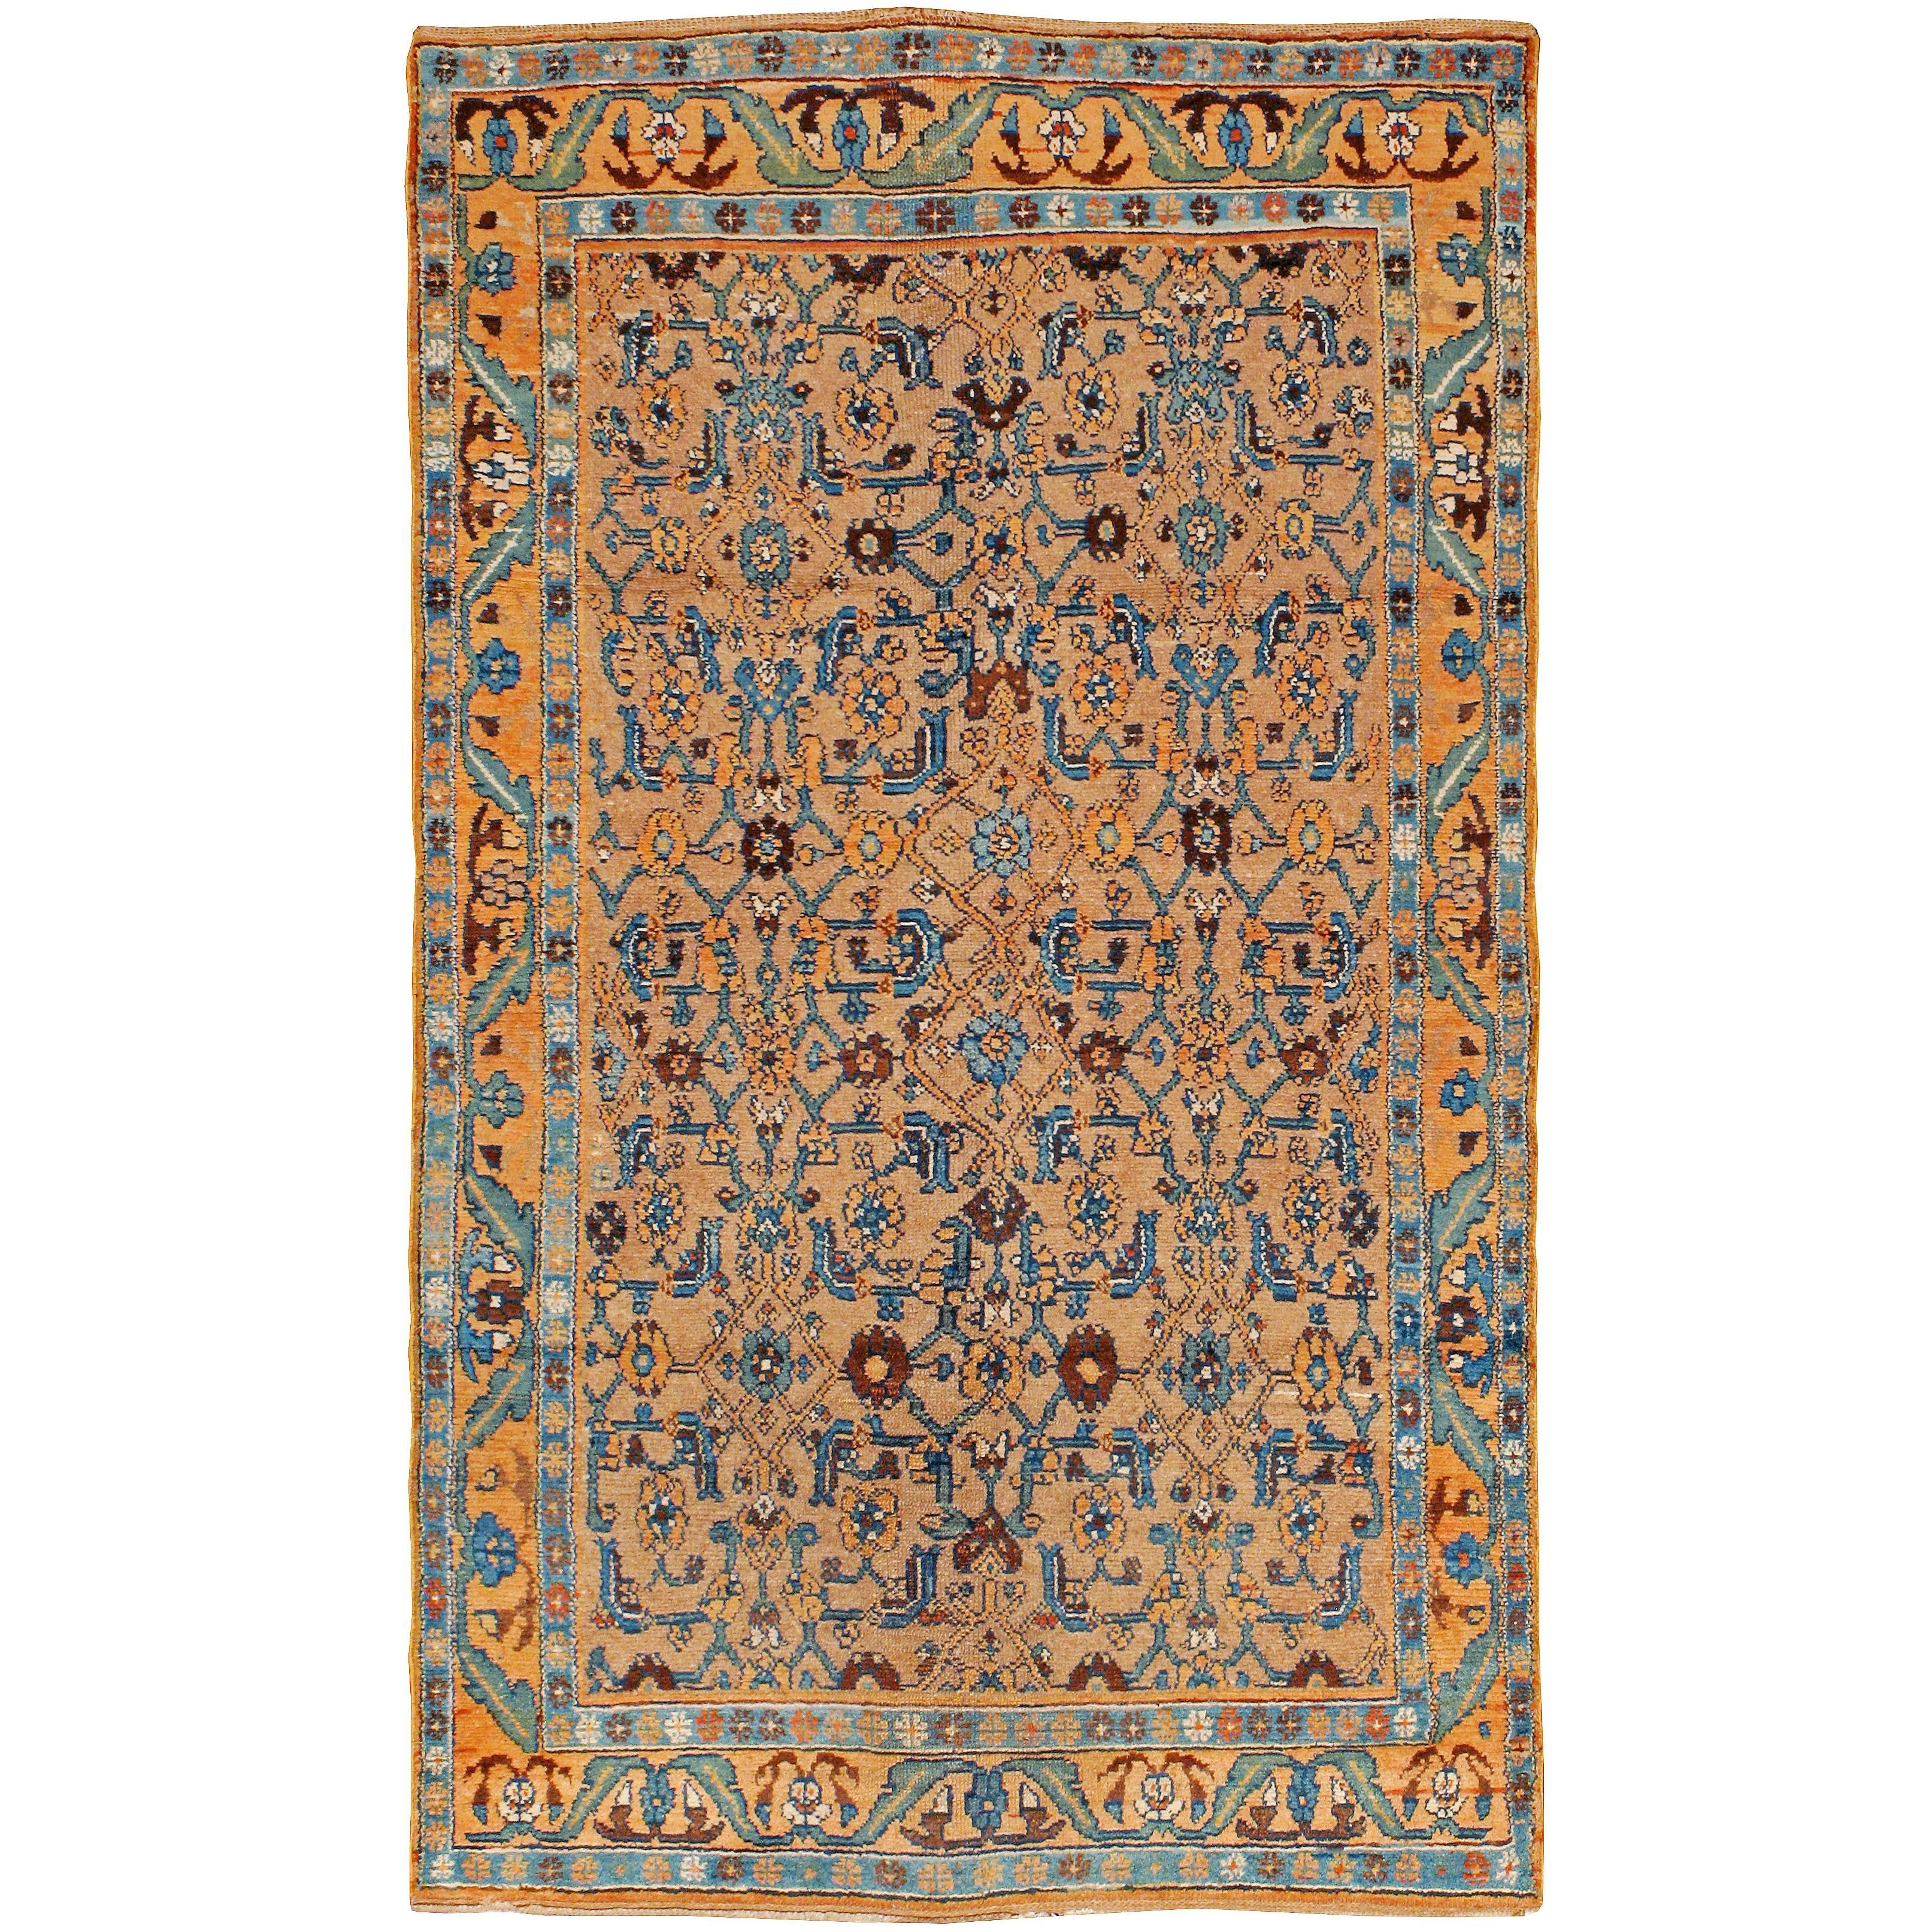 Early 20th Century Handmade Persian Kurd Throw Rug In Light Brown And Blue Green For Sale